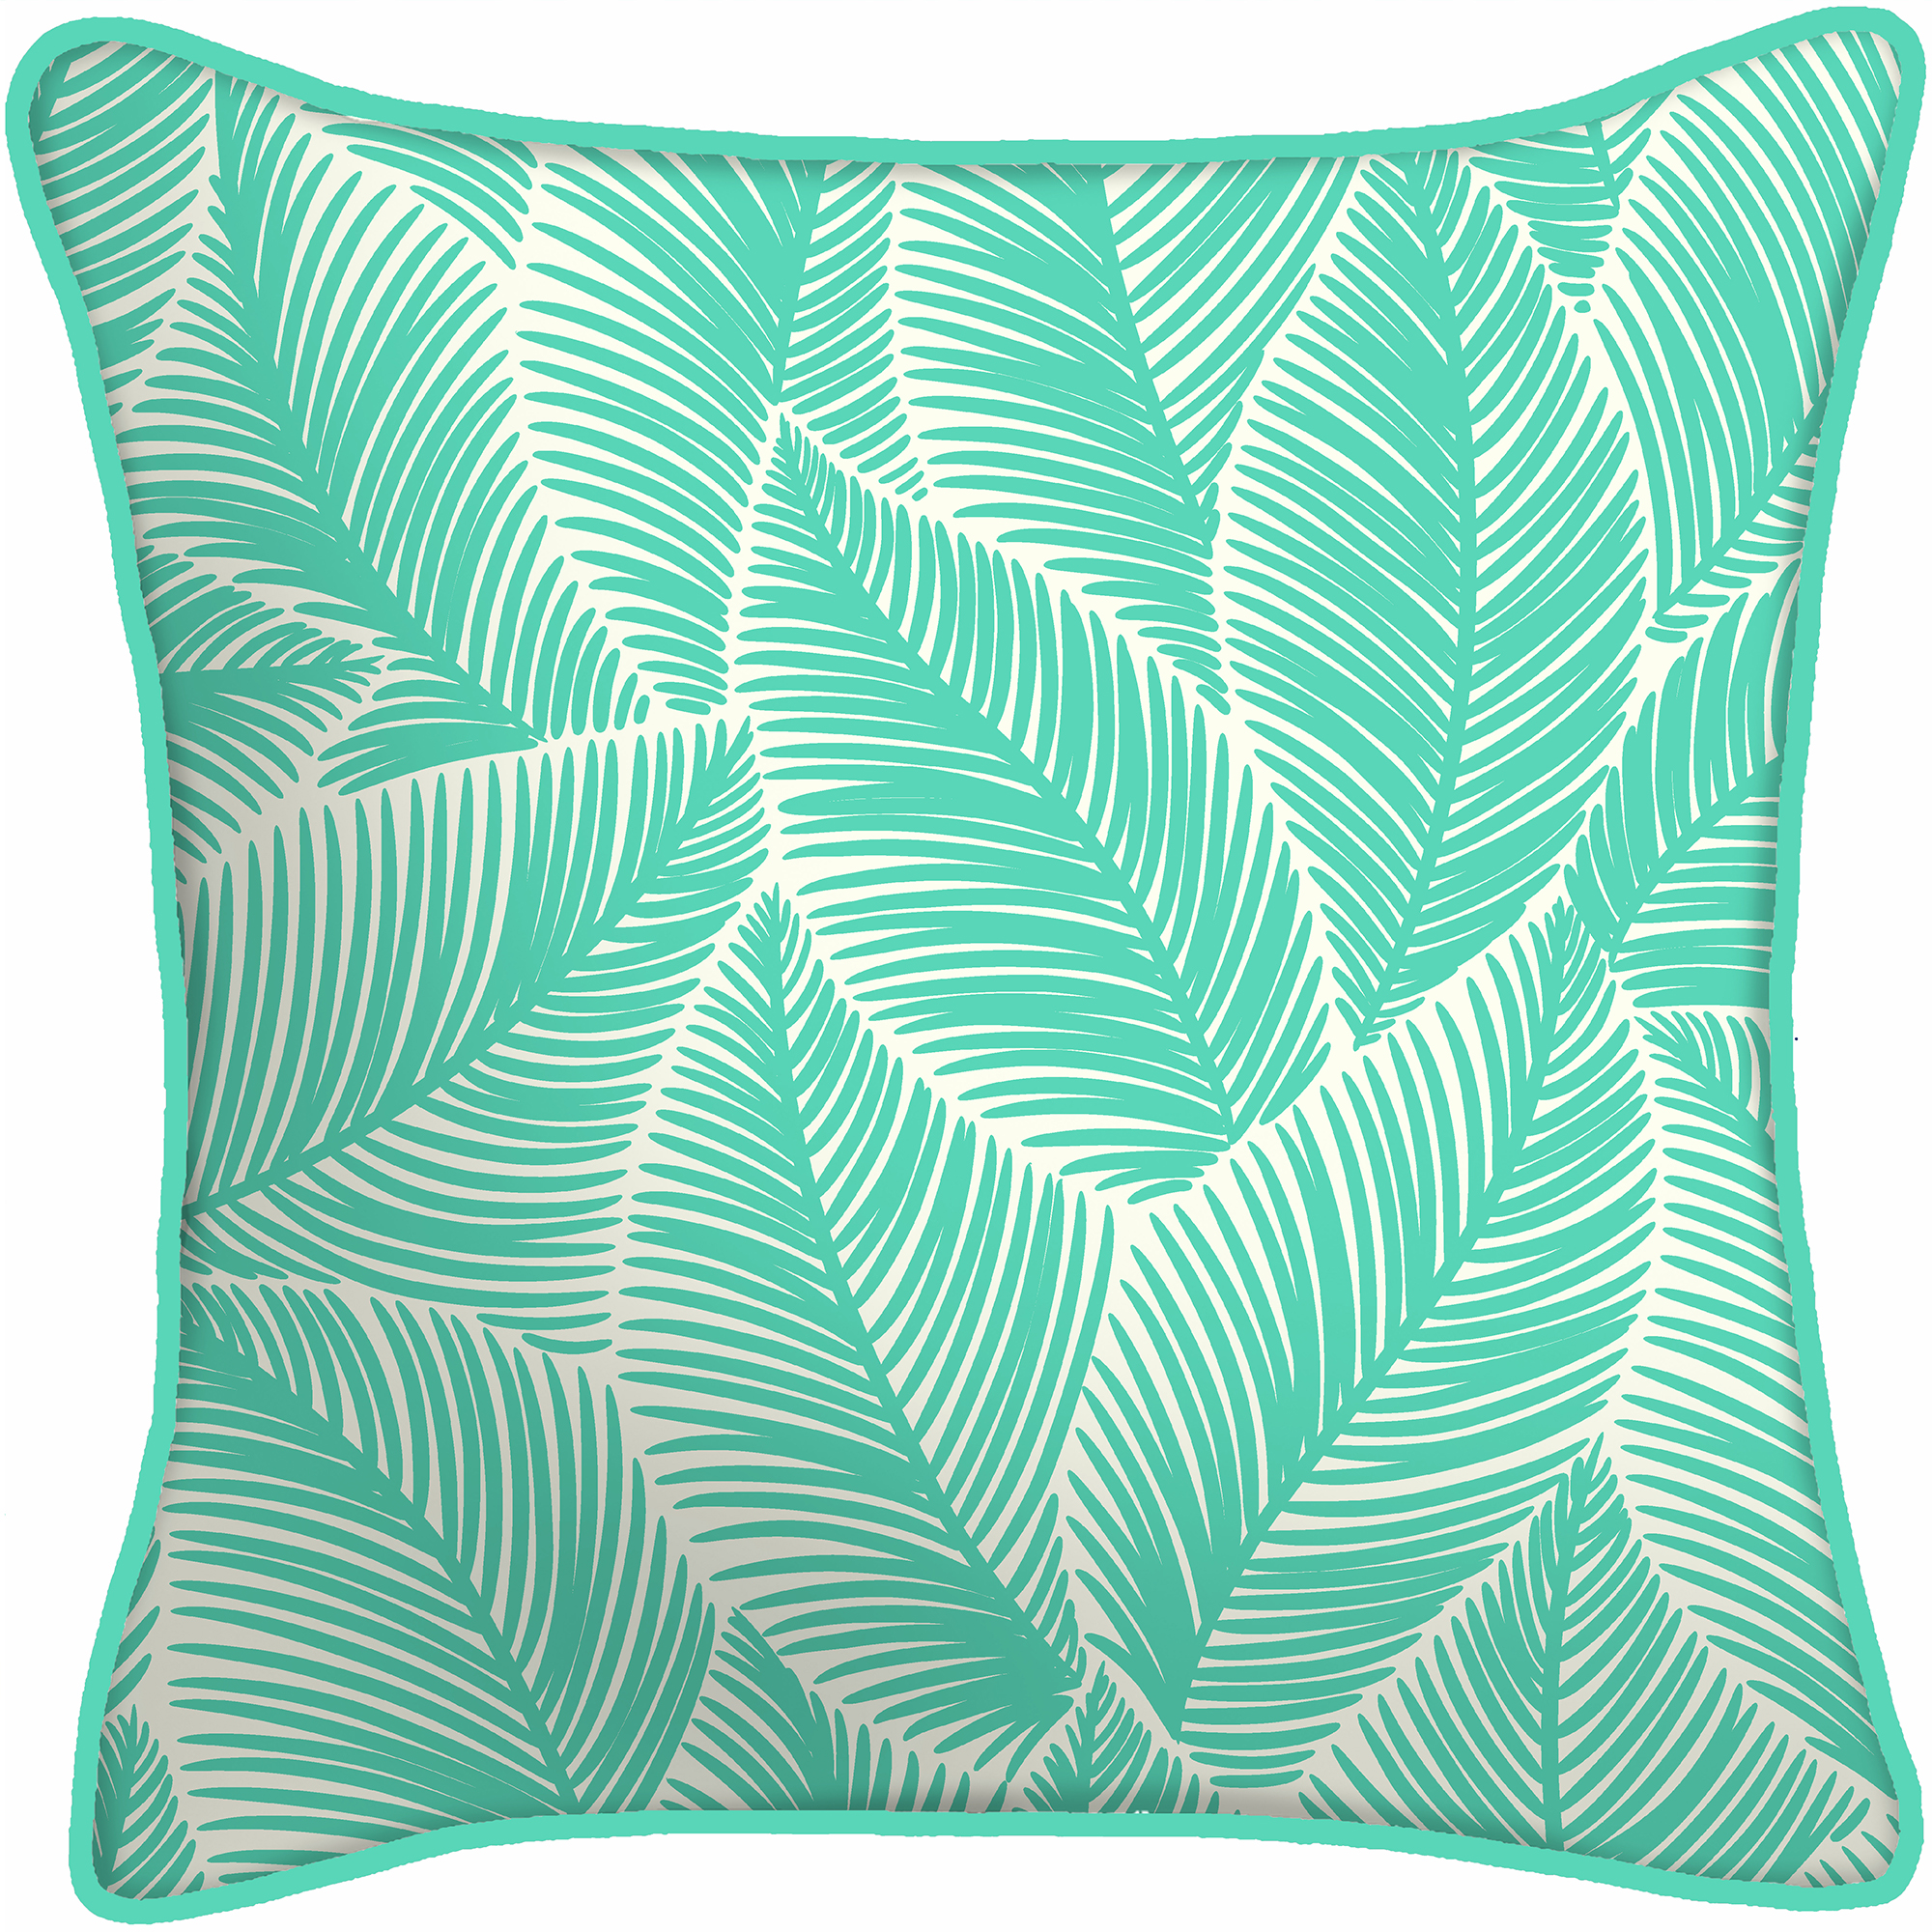 Mainstays Outdoor Throw Pillow, 16", Turquoise Palm Leaves - image 1 of 8